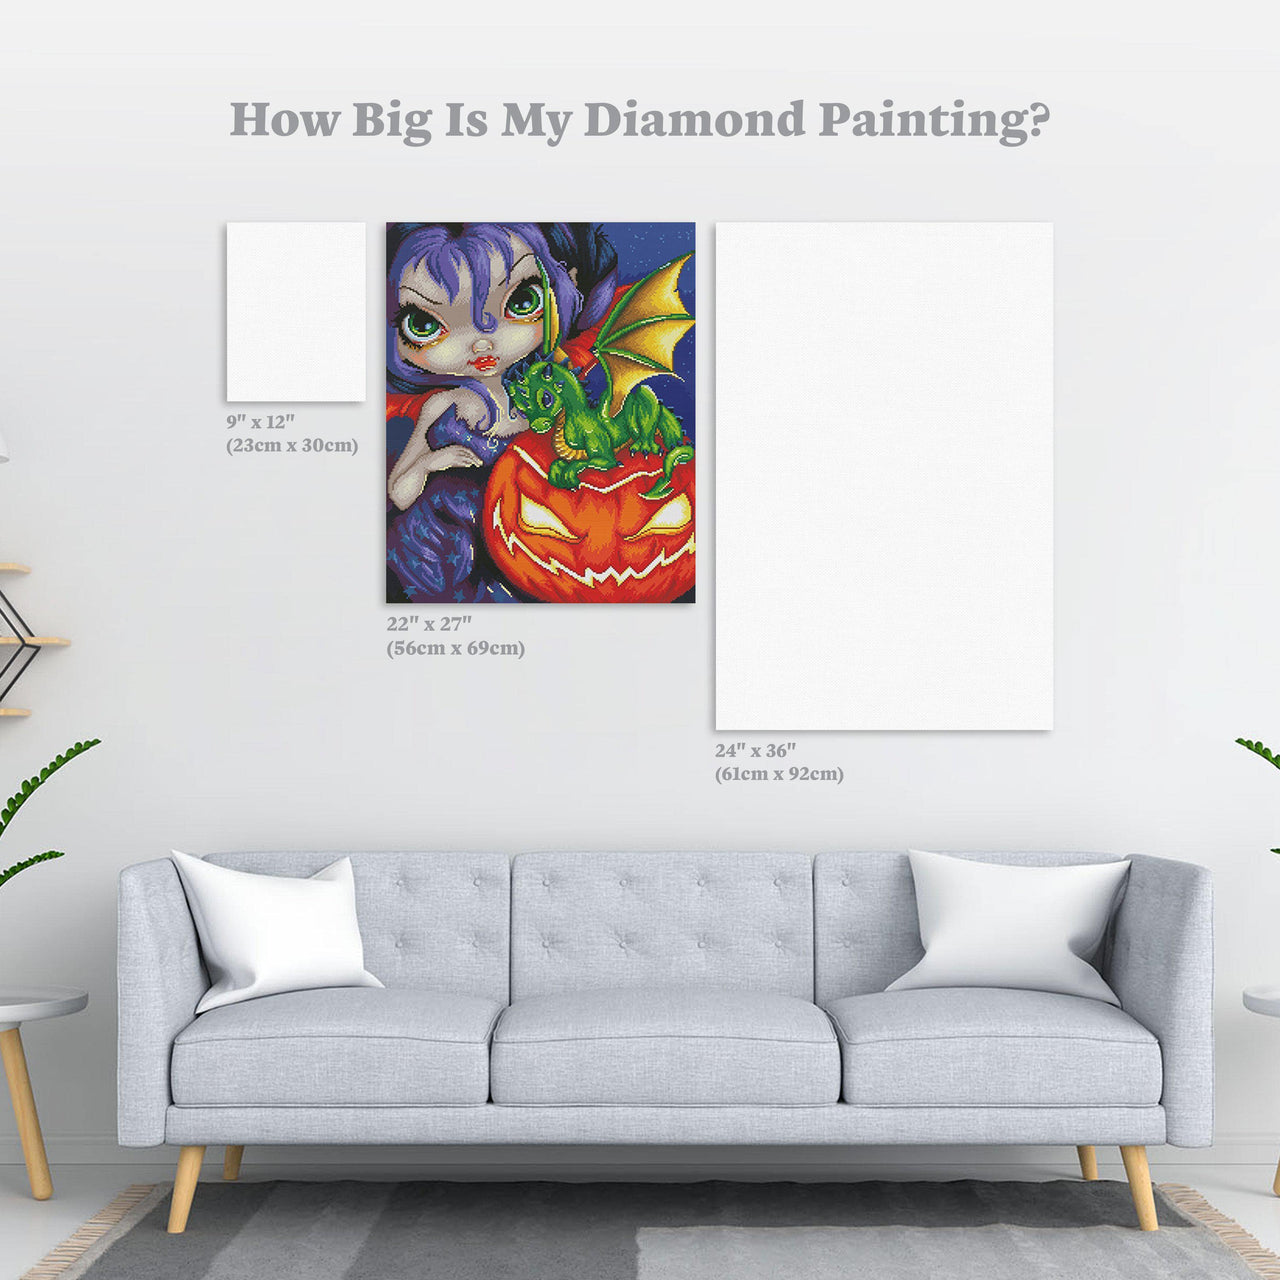 Diamond Painting Darling Dragonling 2 22" x 27″ (56cm x 69cm) / Round with 45 Colors including 4 ABs / 48,954